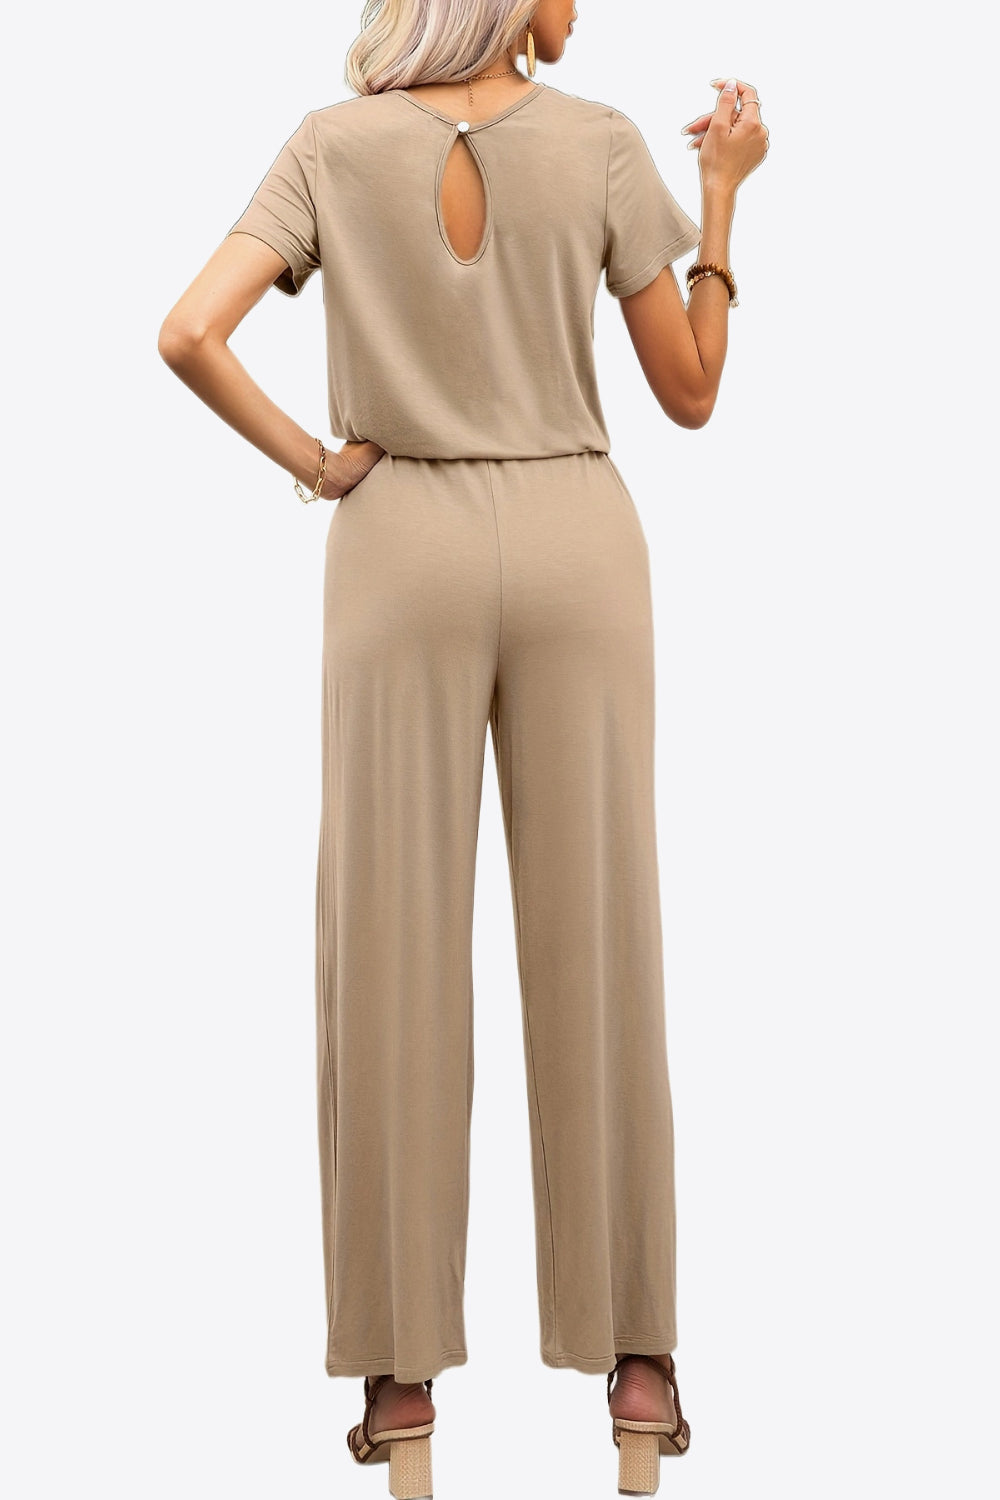 Uylee's Boutique Round Neck Short Sleeve Jumpsuit with Pockets